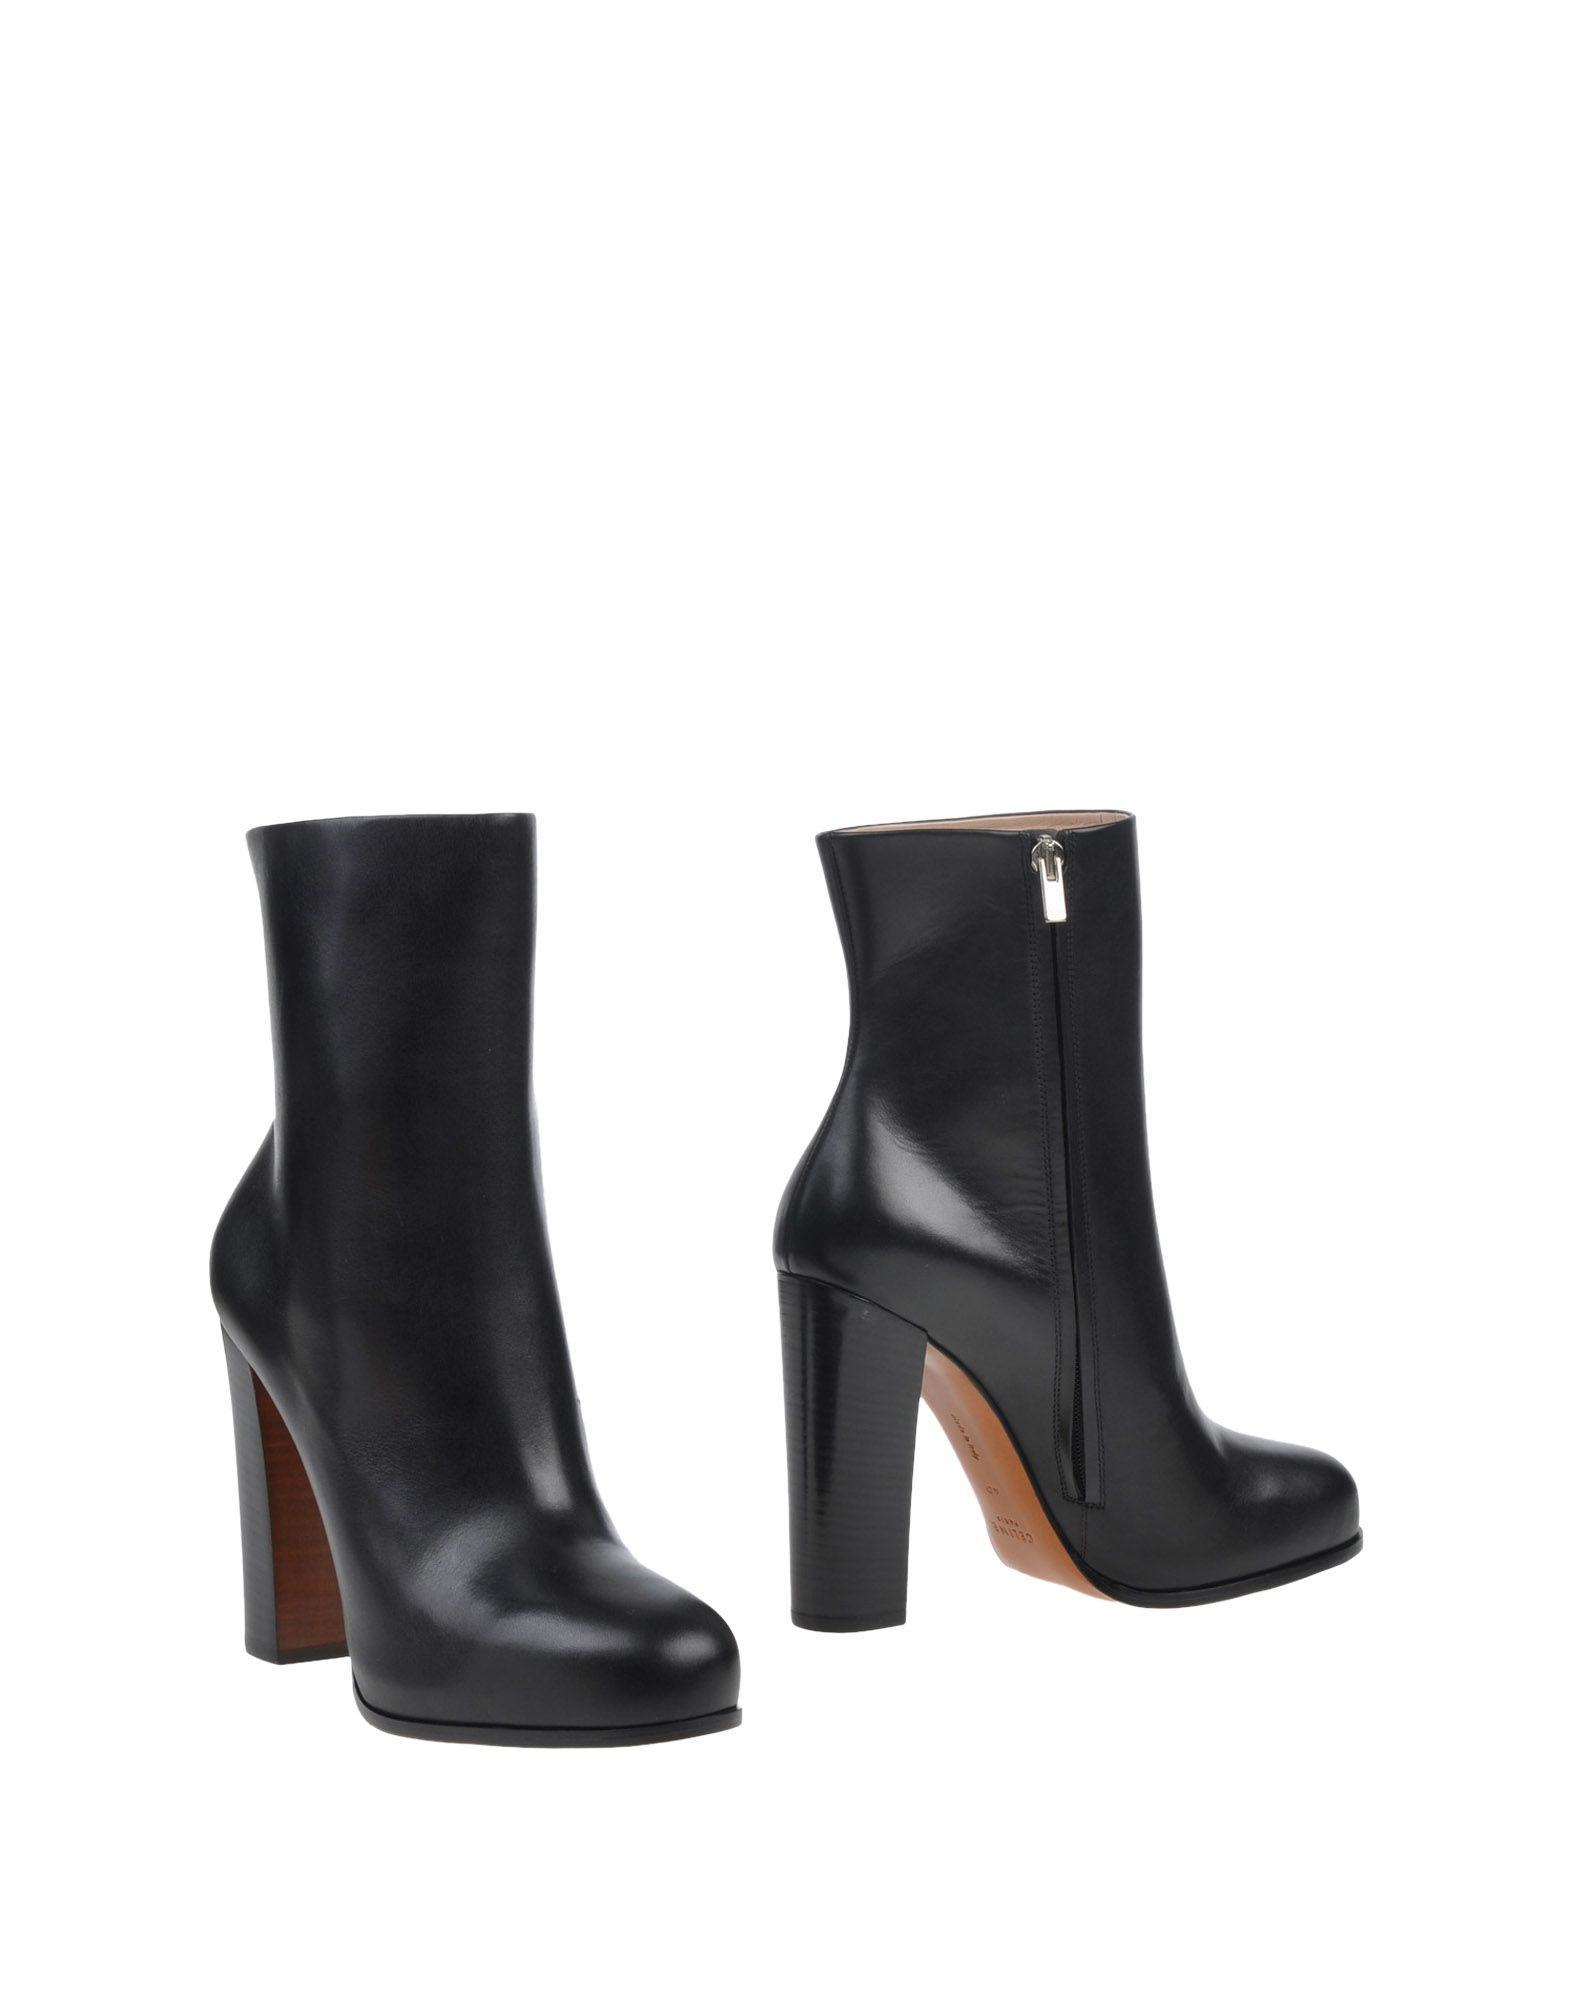 Lyst - Céline Ankle Boots in Black